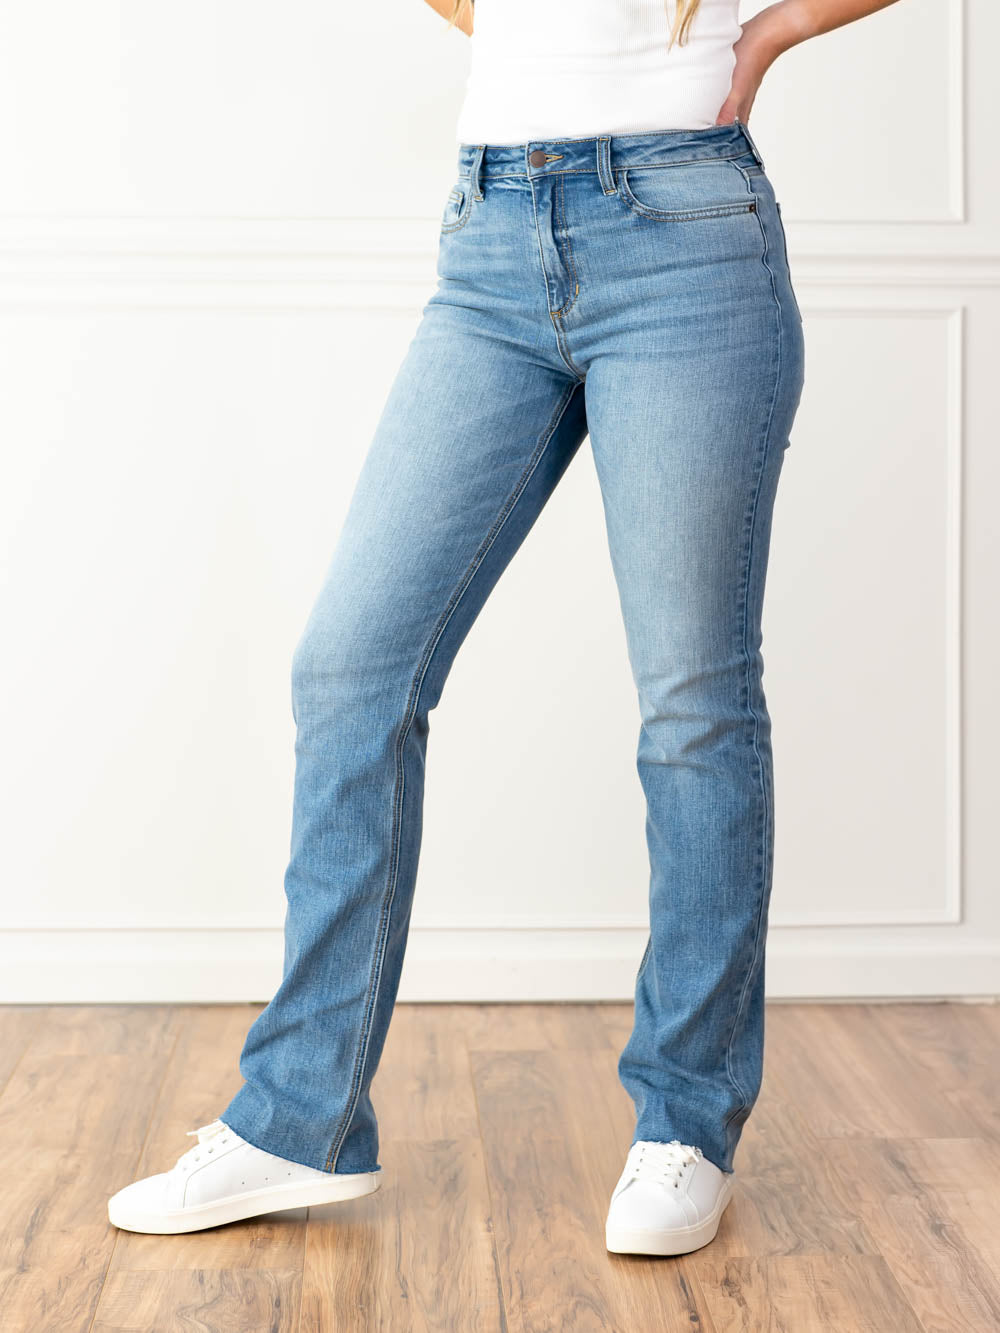 Chanel Straight Leg Jean for Tall Women - 34 and 36 Inseam